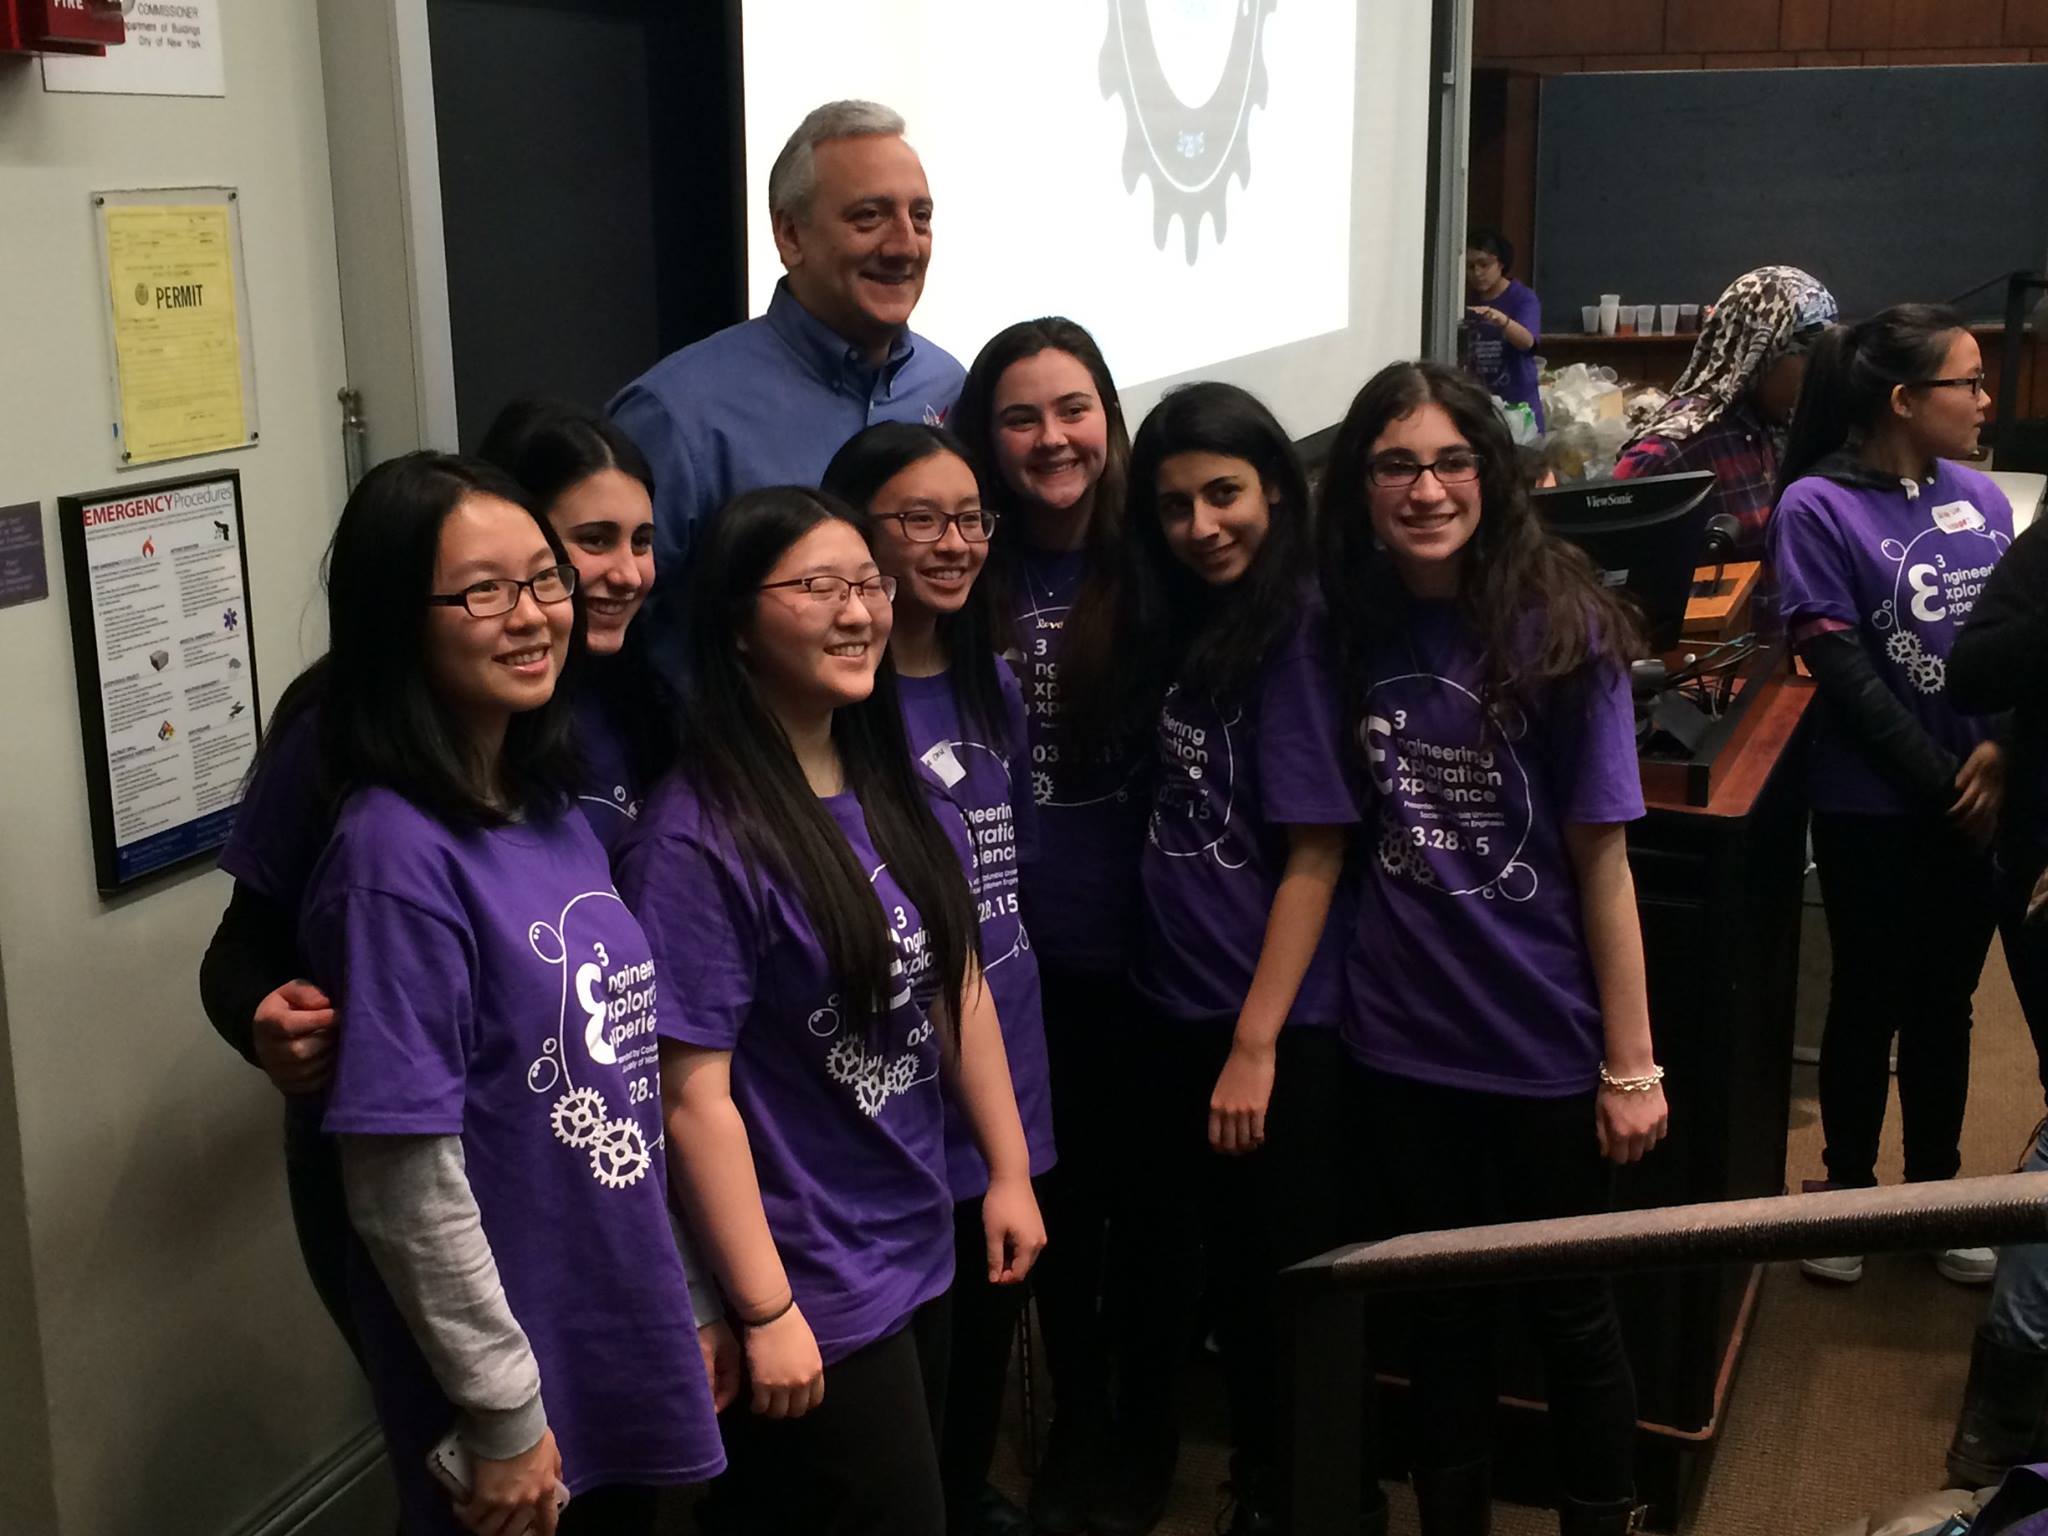 Society of Women Engineer's Engineering Exploration Experience event had a presentation from Professor Mike Massimino